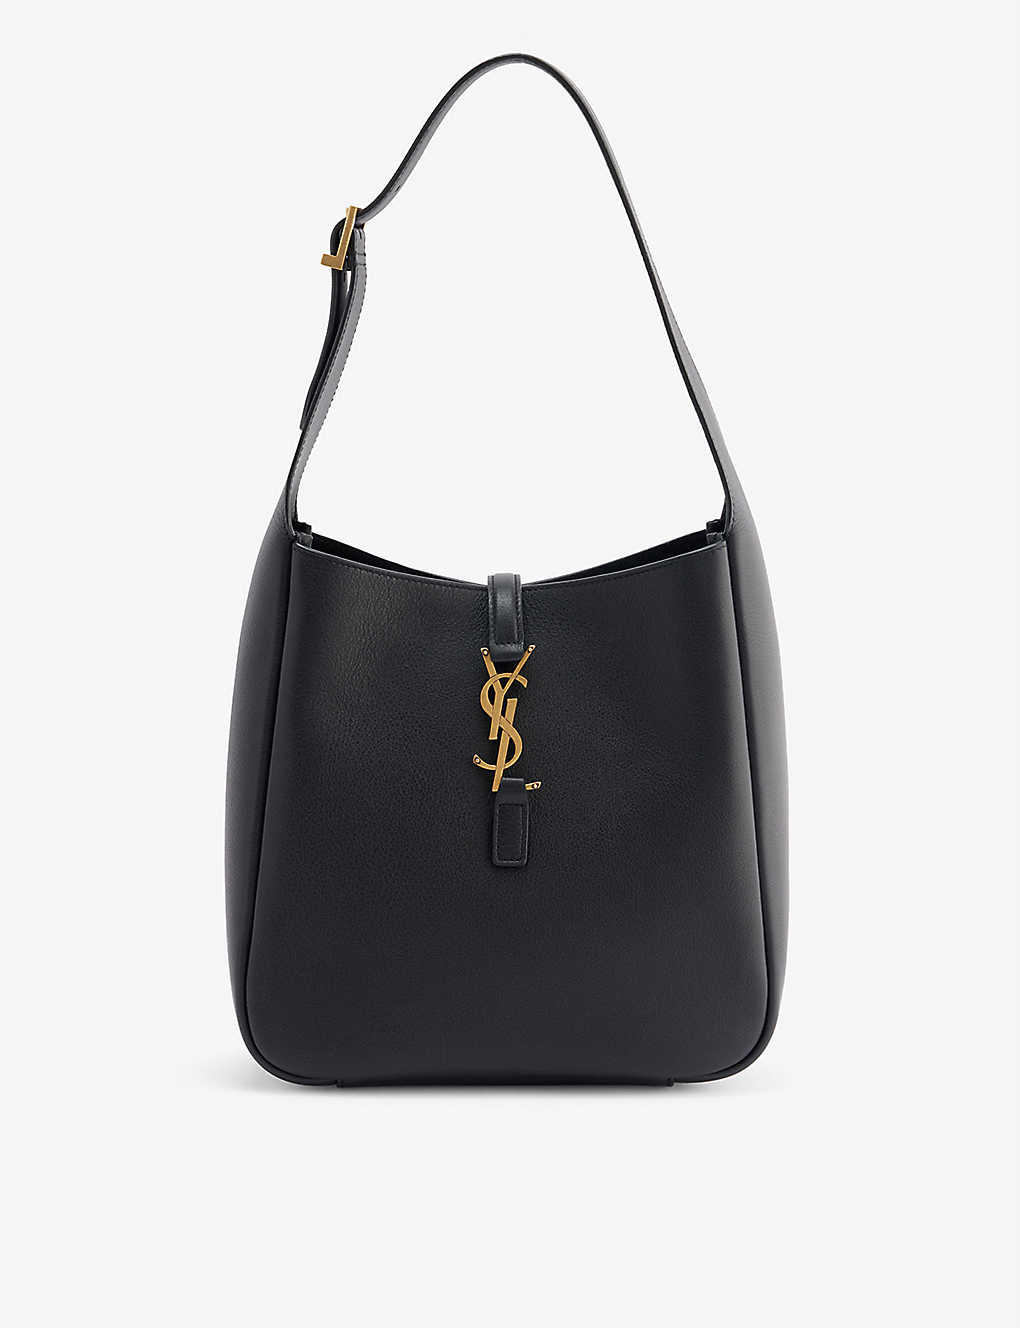 Shop the Saint Laurent Tote Bag Every Celebrity Is Carrying